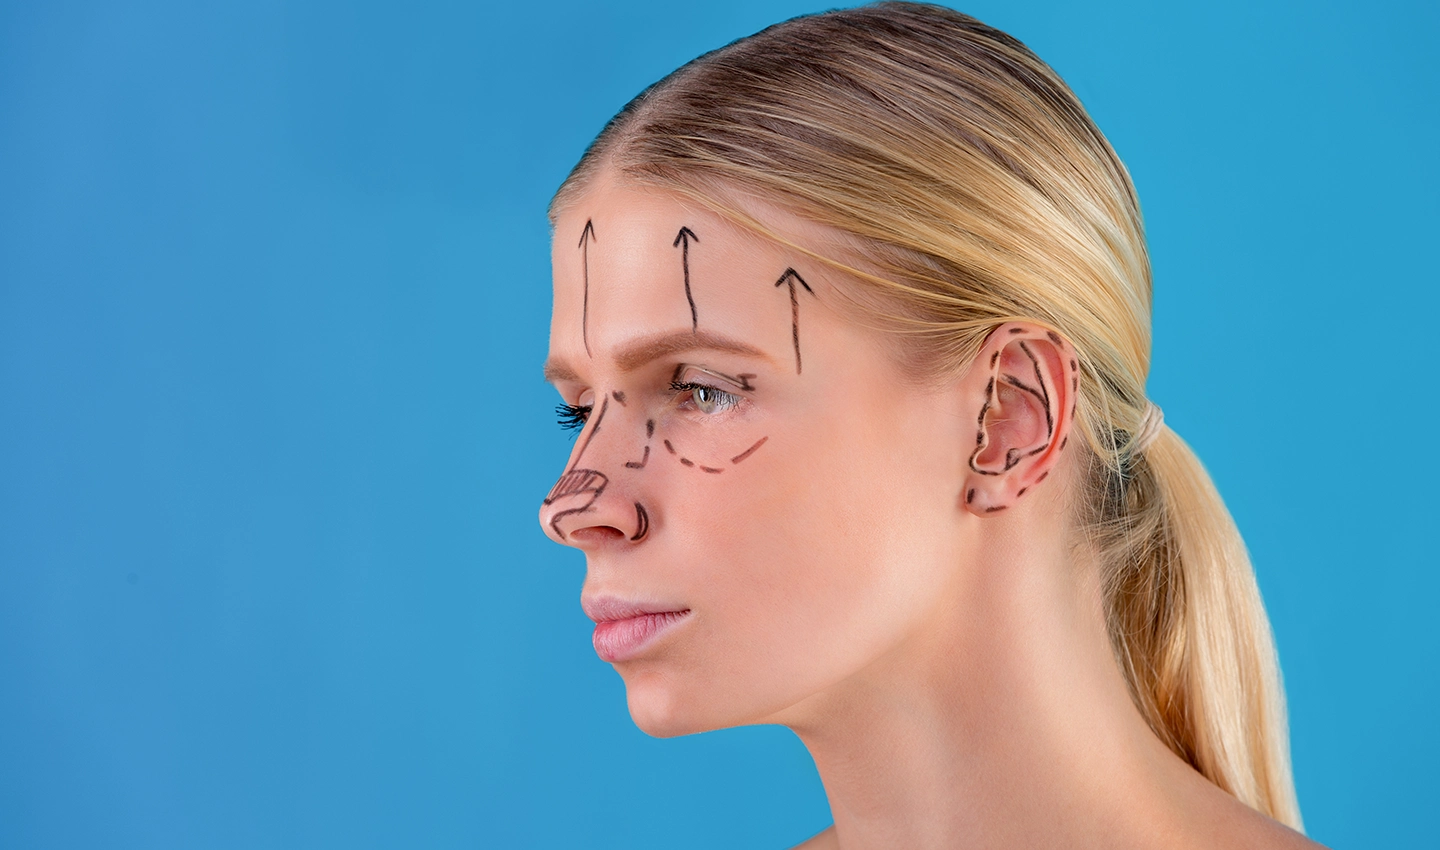 A woman preparing for facelift surgery with black markers on her face.